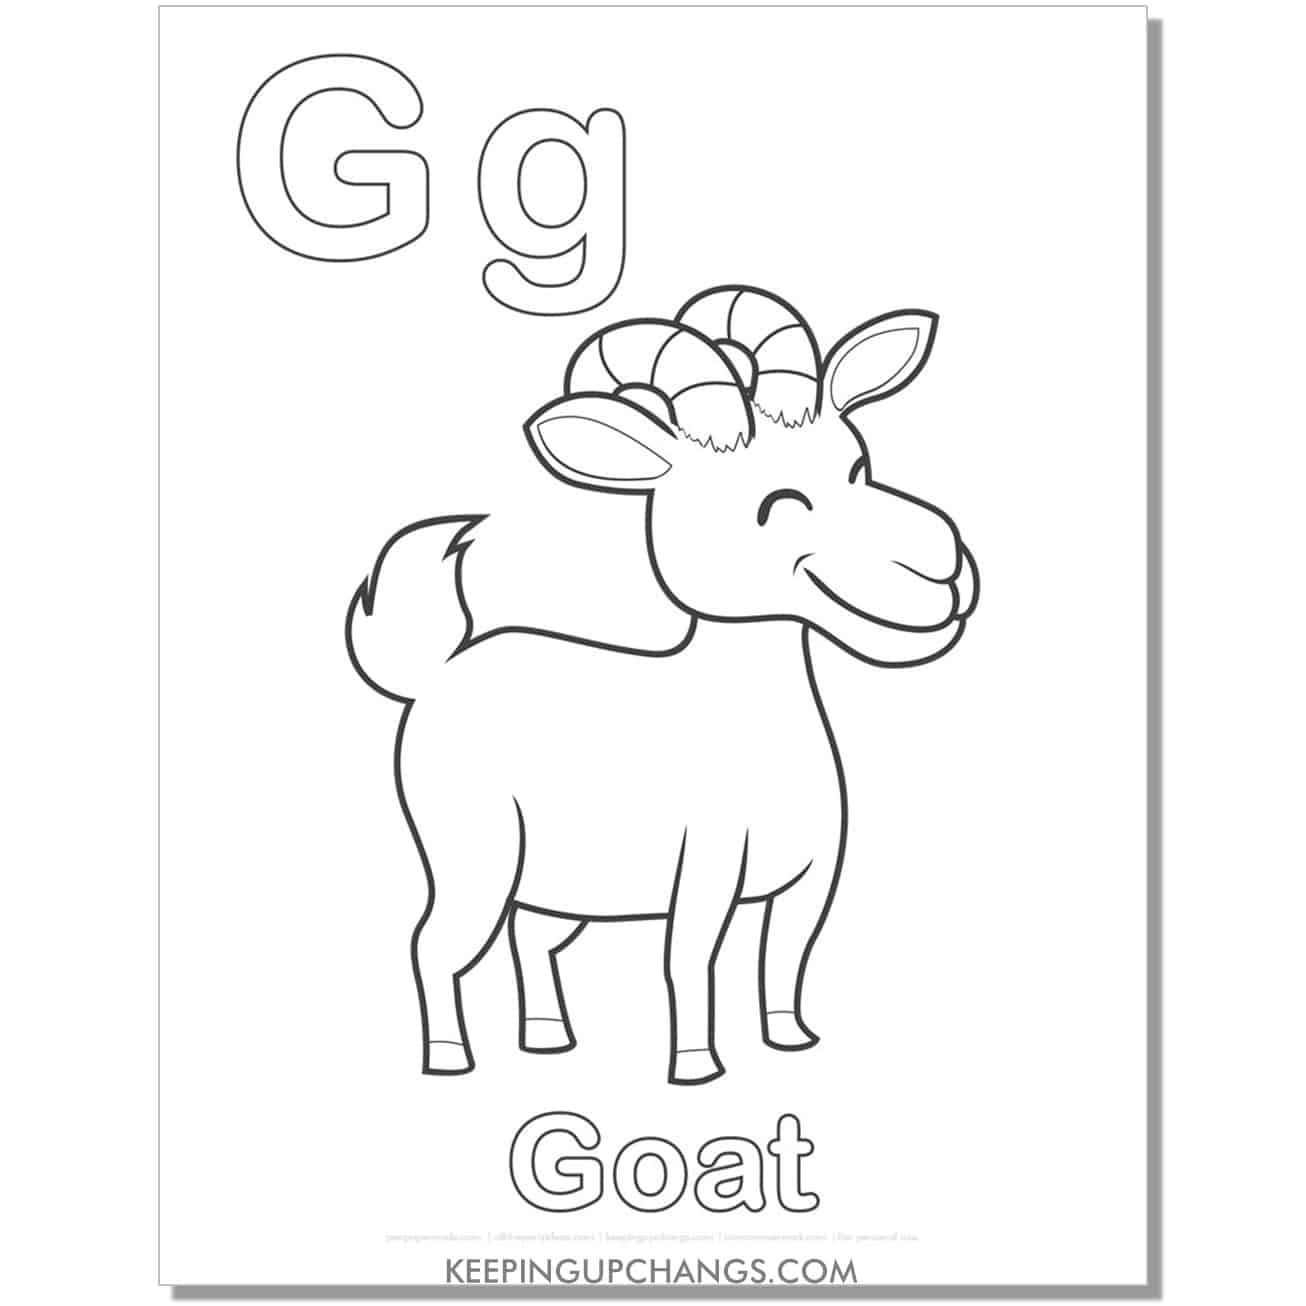 abc coloring sheet, g for goat.